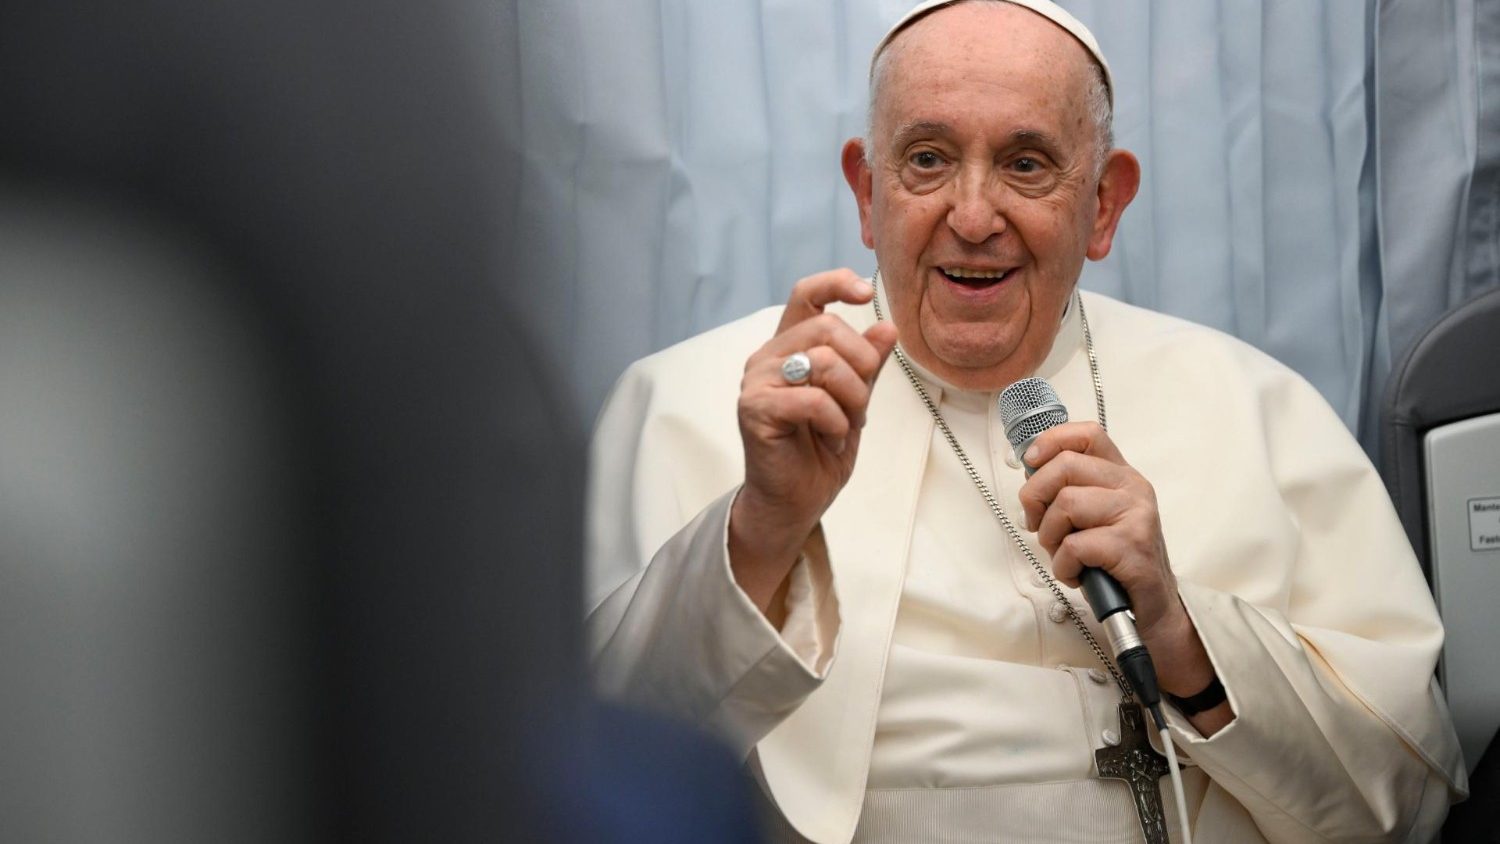 Pope Francis Addresses Immigration, Euthanasia, and Ukraine Crisis in Press Conference